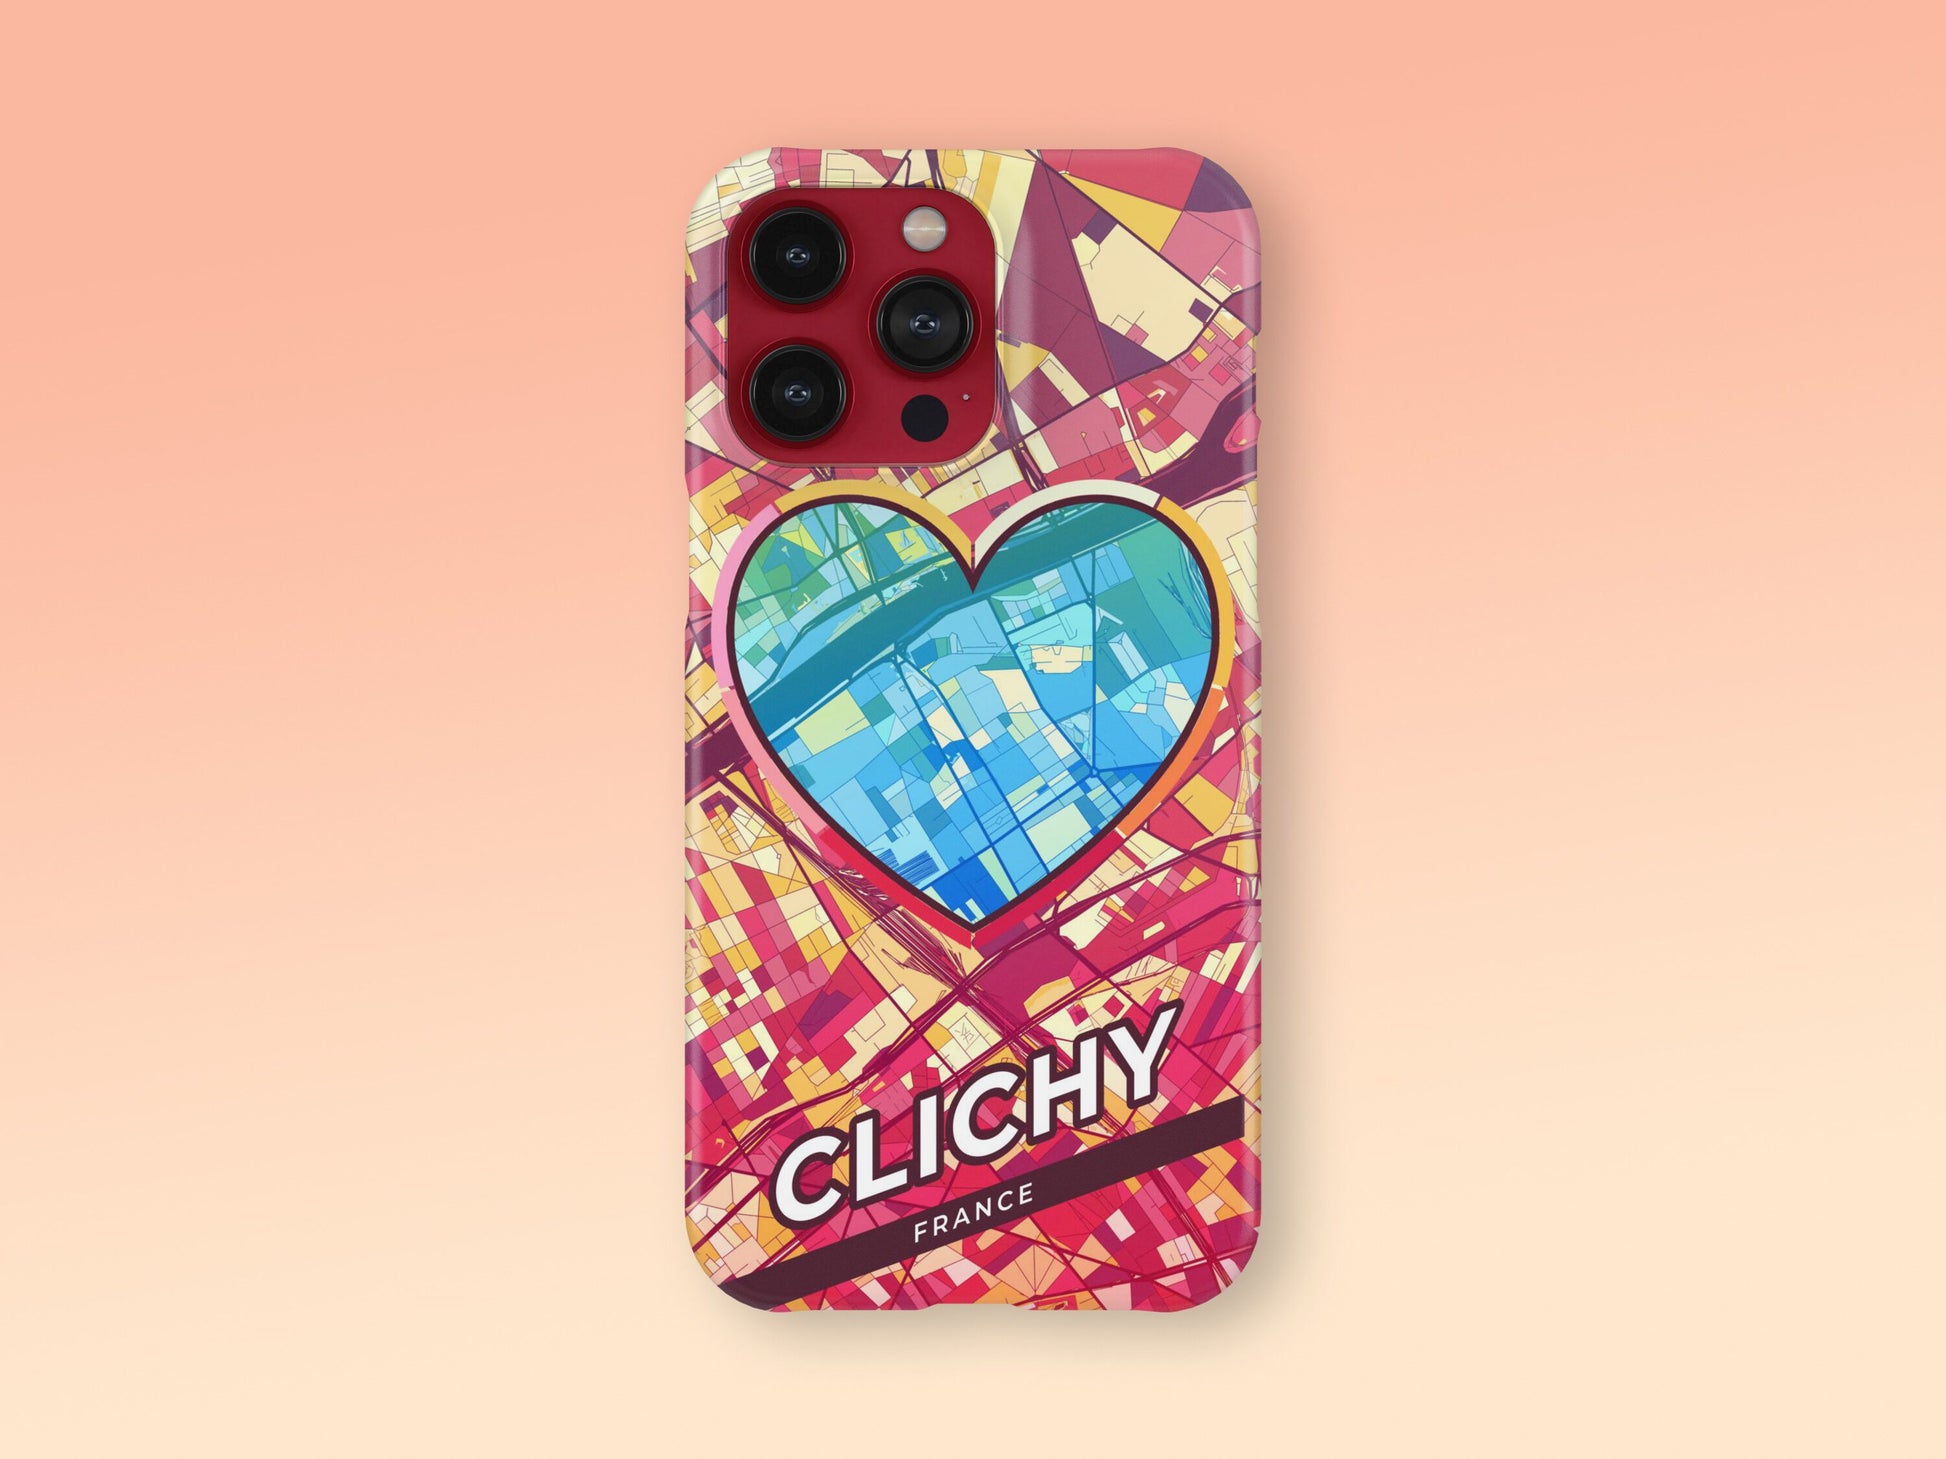 Clichy France slim phone case with colorful icon. Birthday, wedding or housewarming gift. Couple match cases. 2